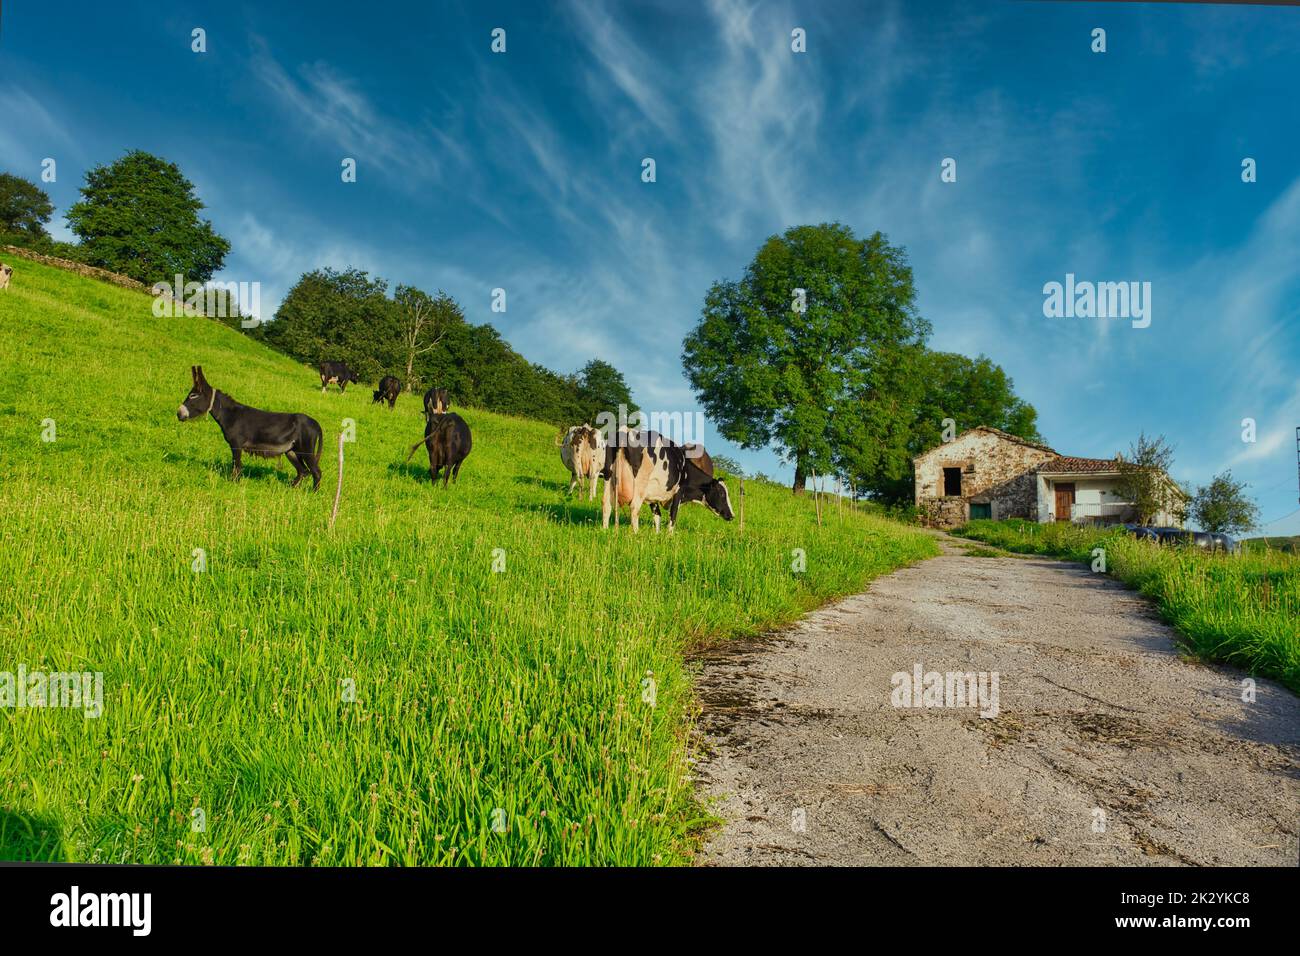 A group of mules and cows grazing on lush green hill next to a road in Spanish countryside Stock Photo